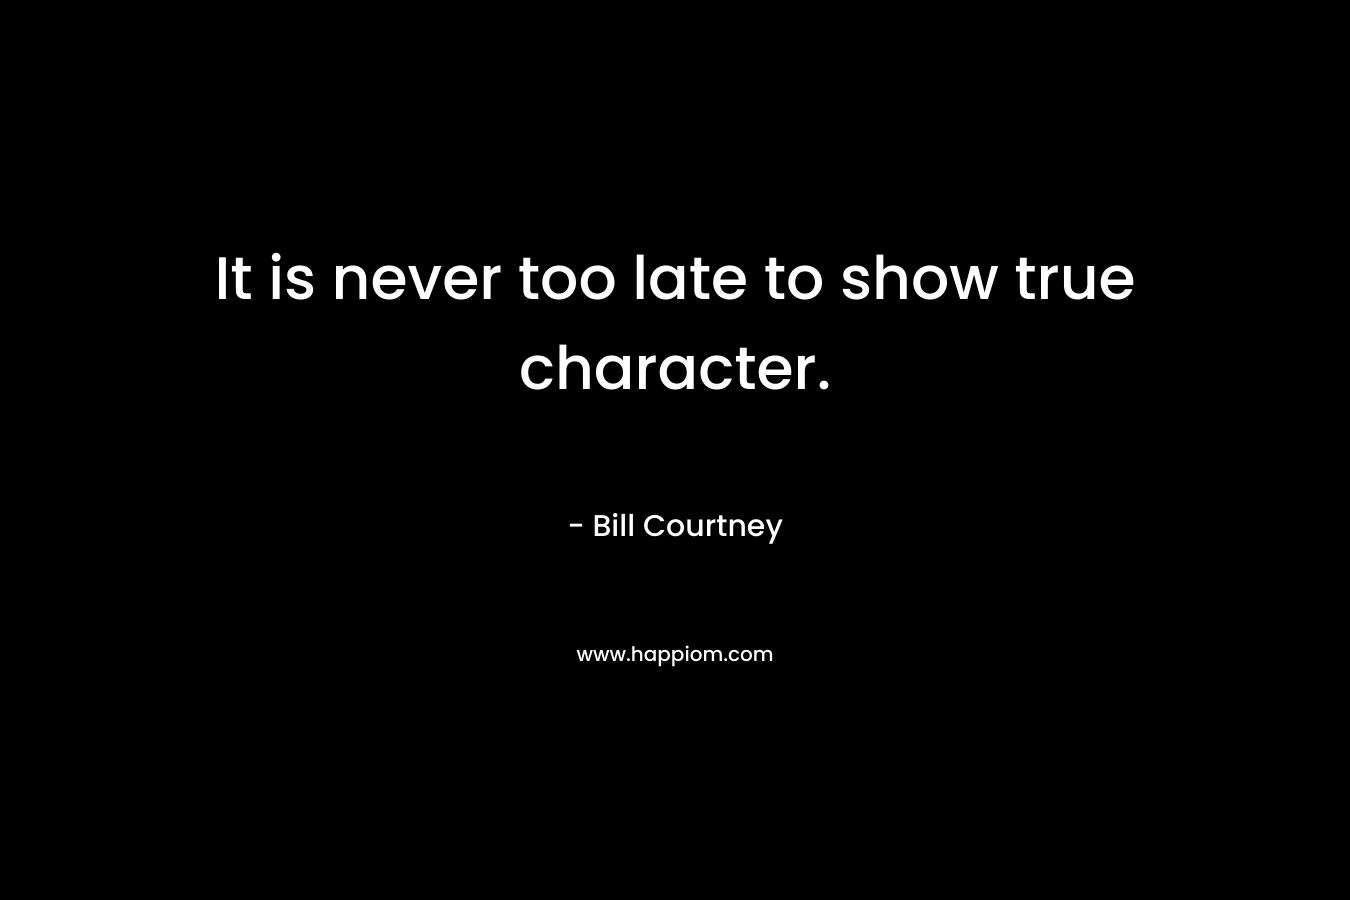 It is never too late to show true character. – Bill Courtney